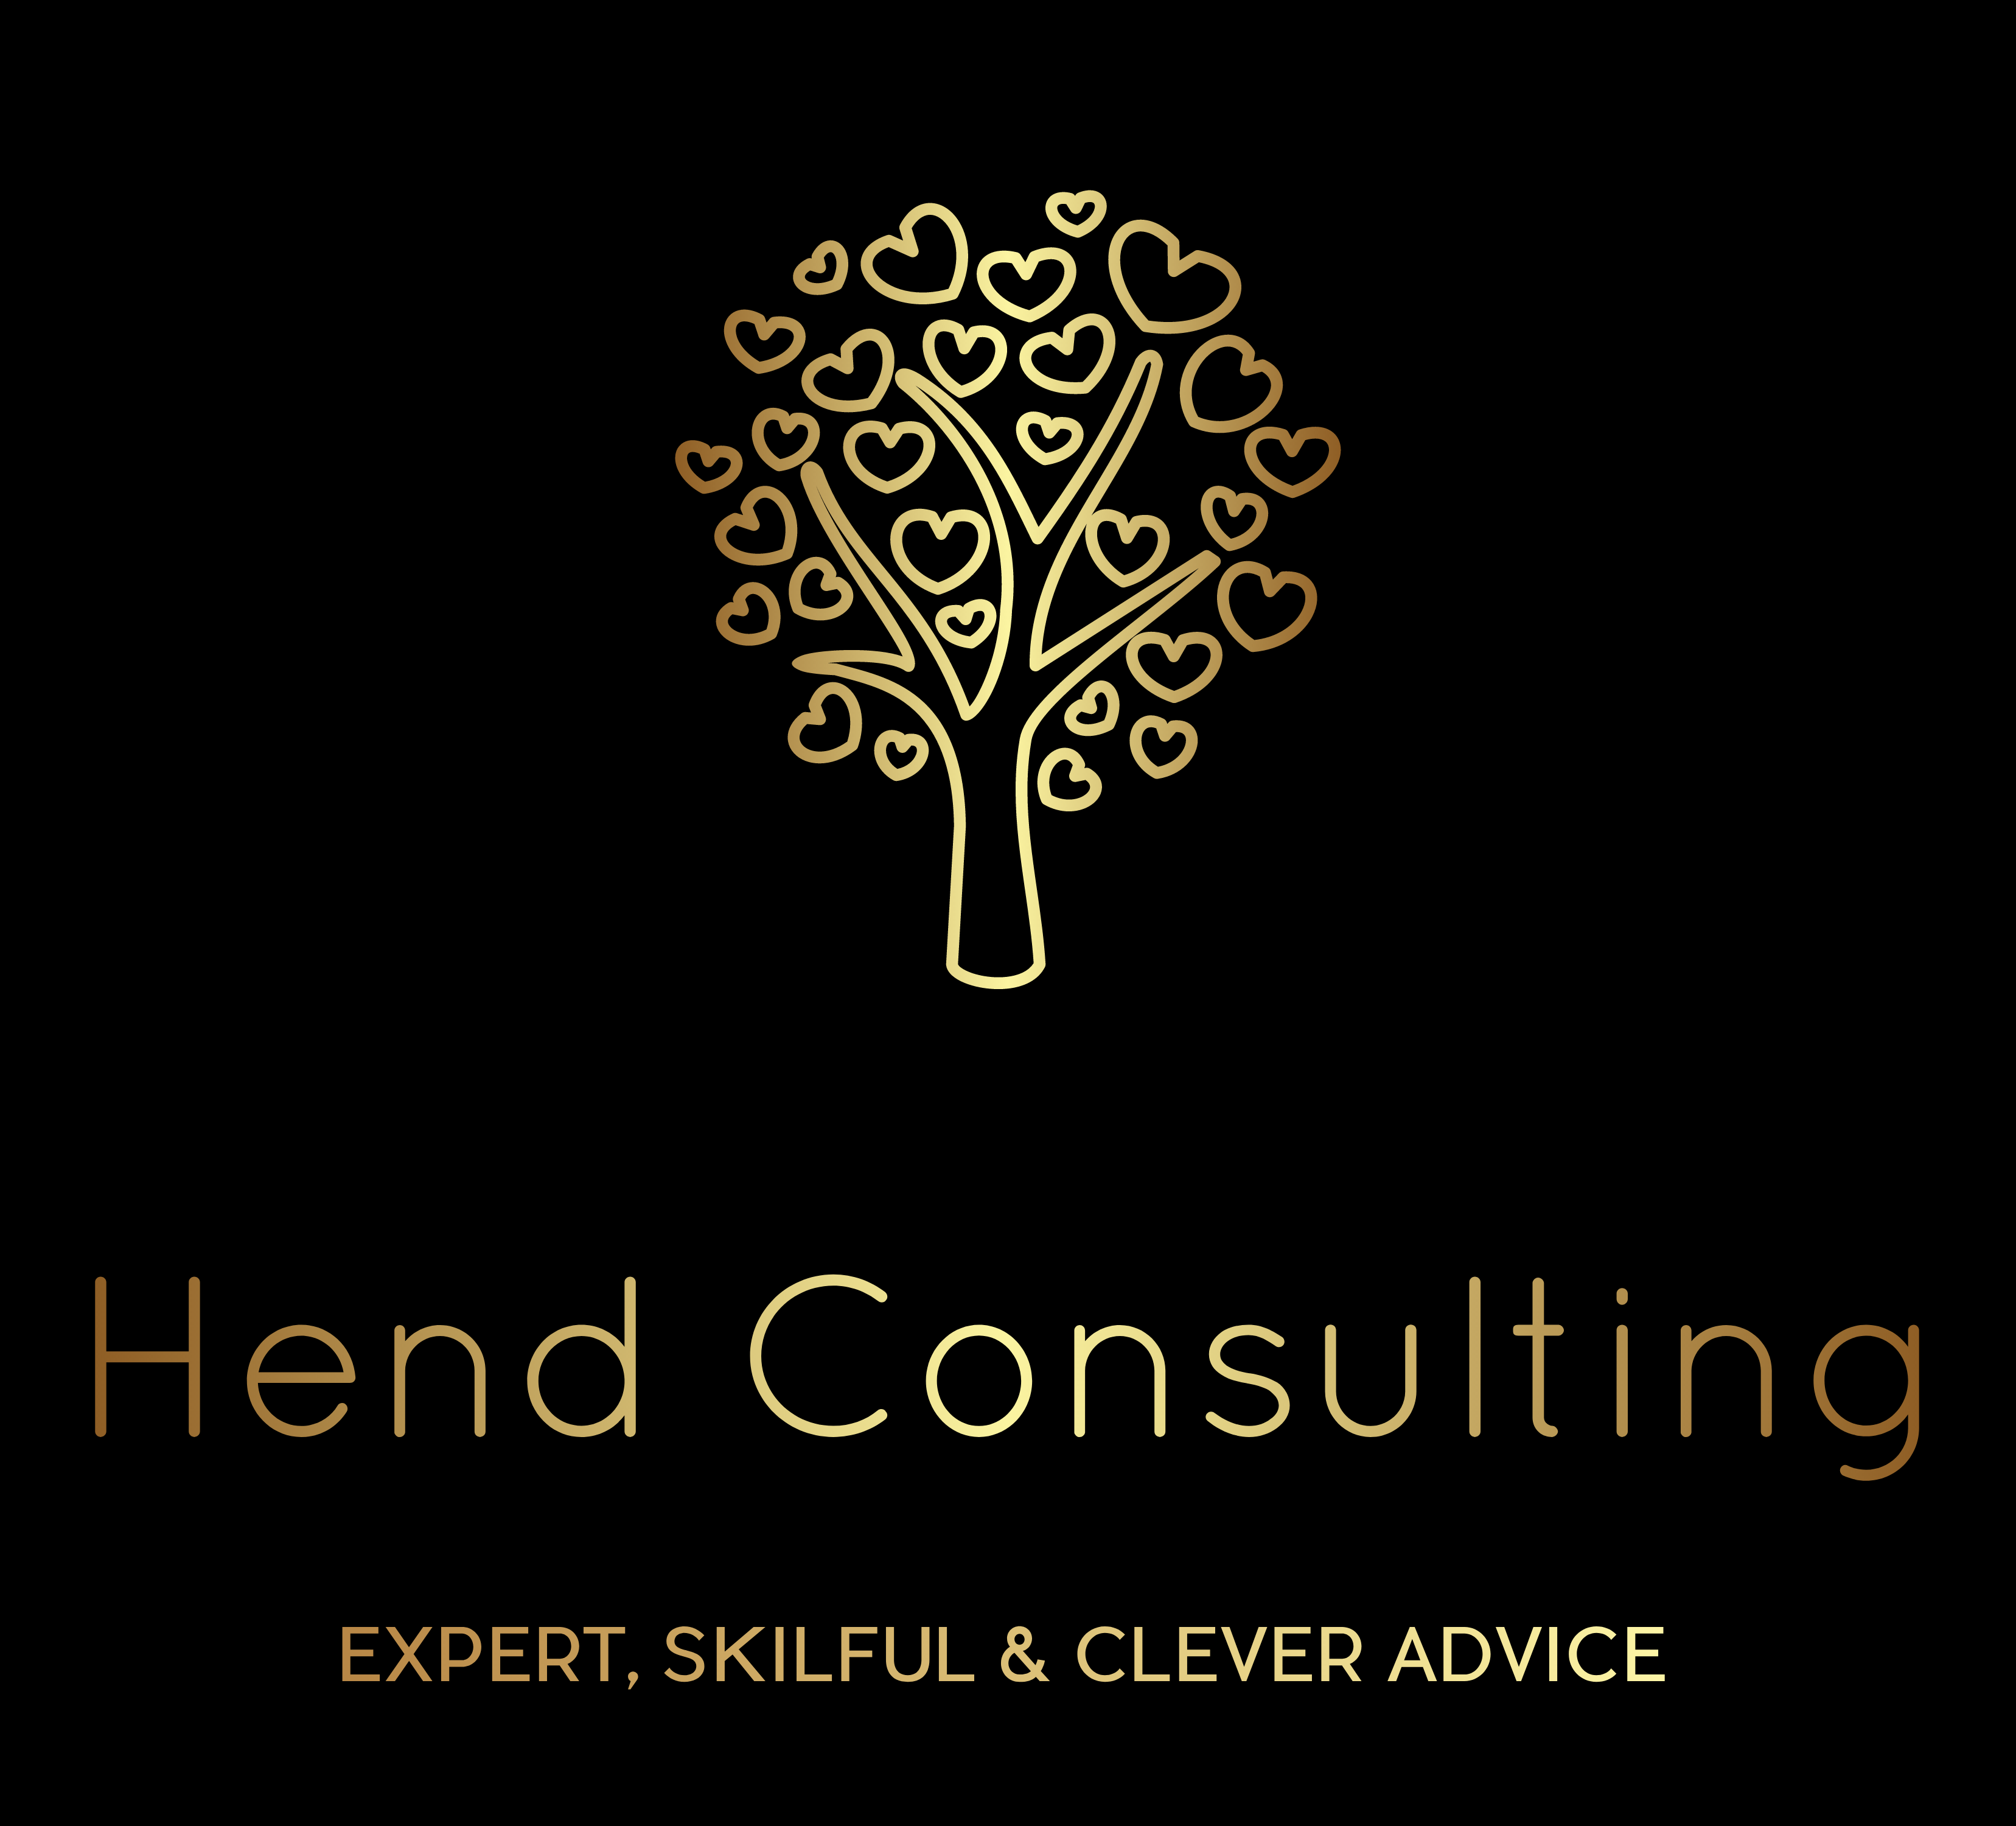 Hend Consulting